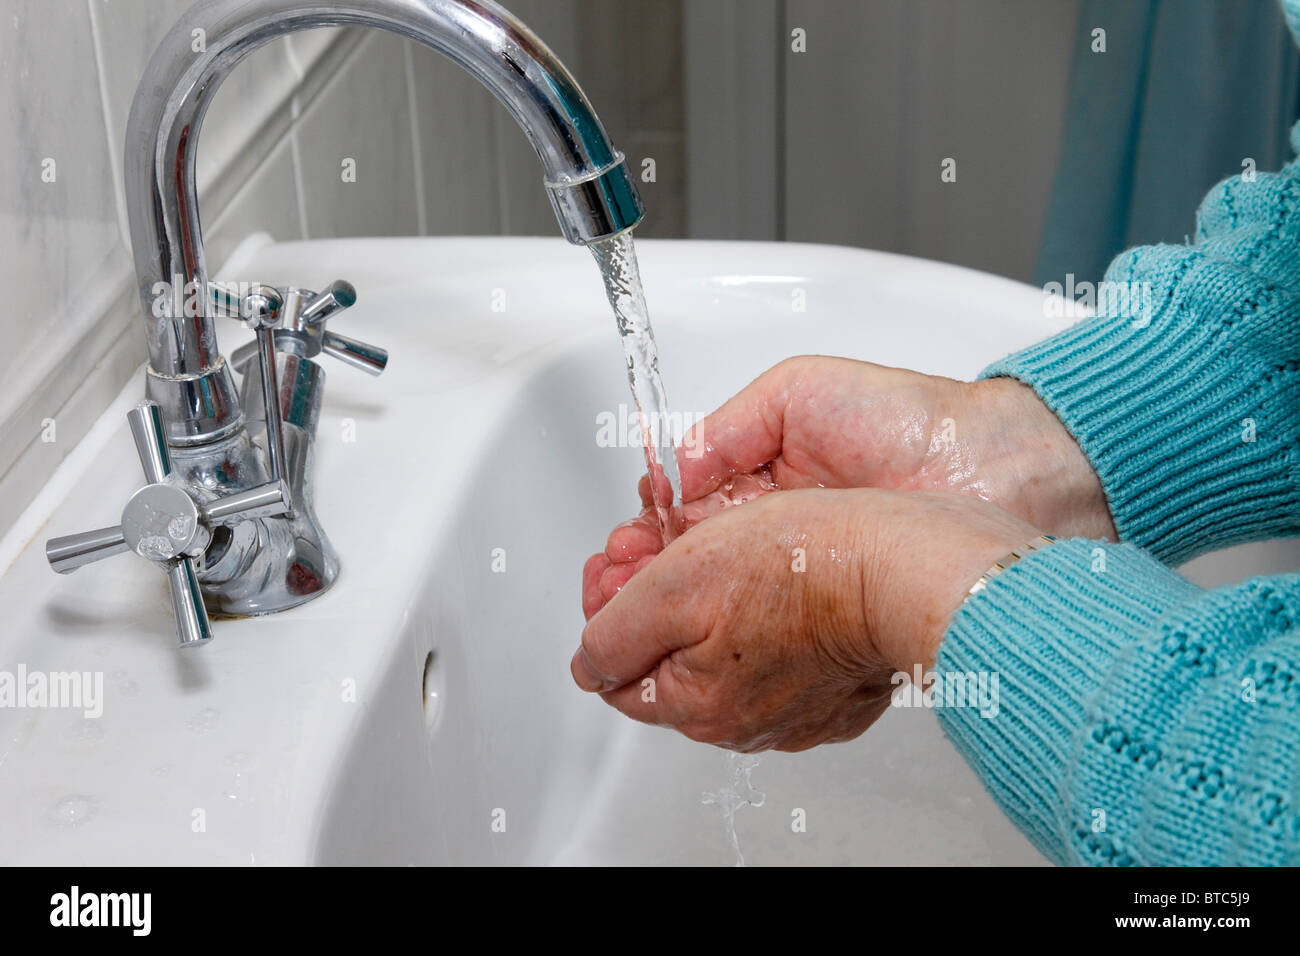 A senior elderly woman cleans by washing hands thoroughly under running tap water in a handbasin to protect against disease. England UK Britain Stock Photo